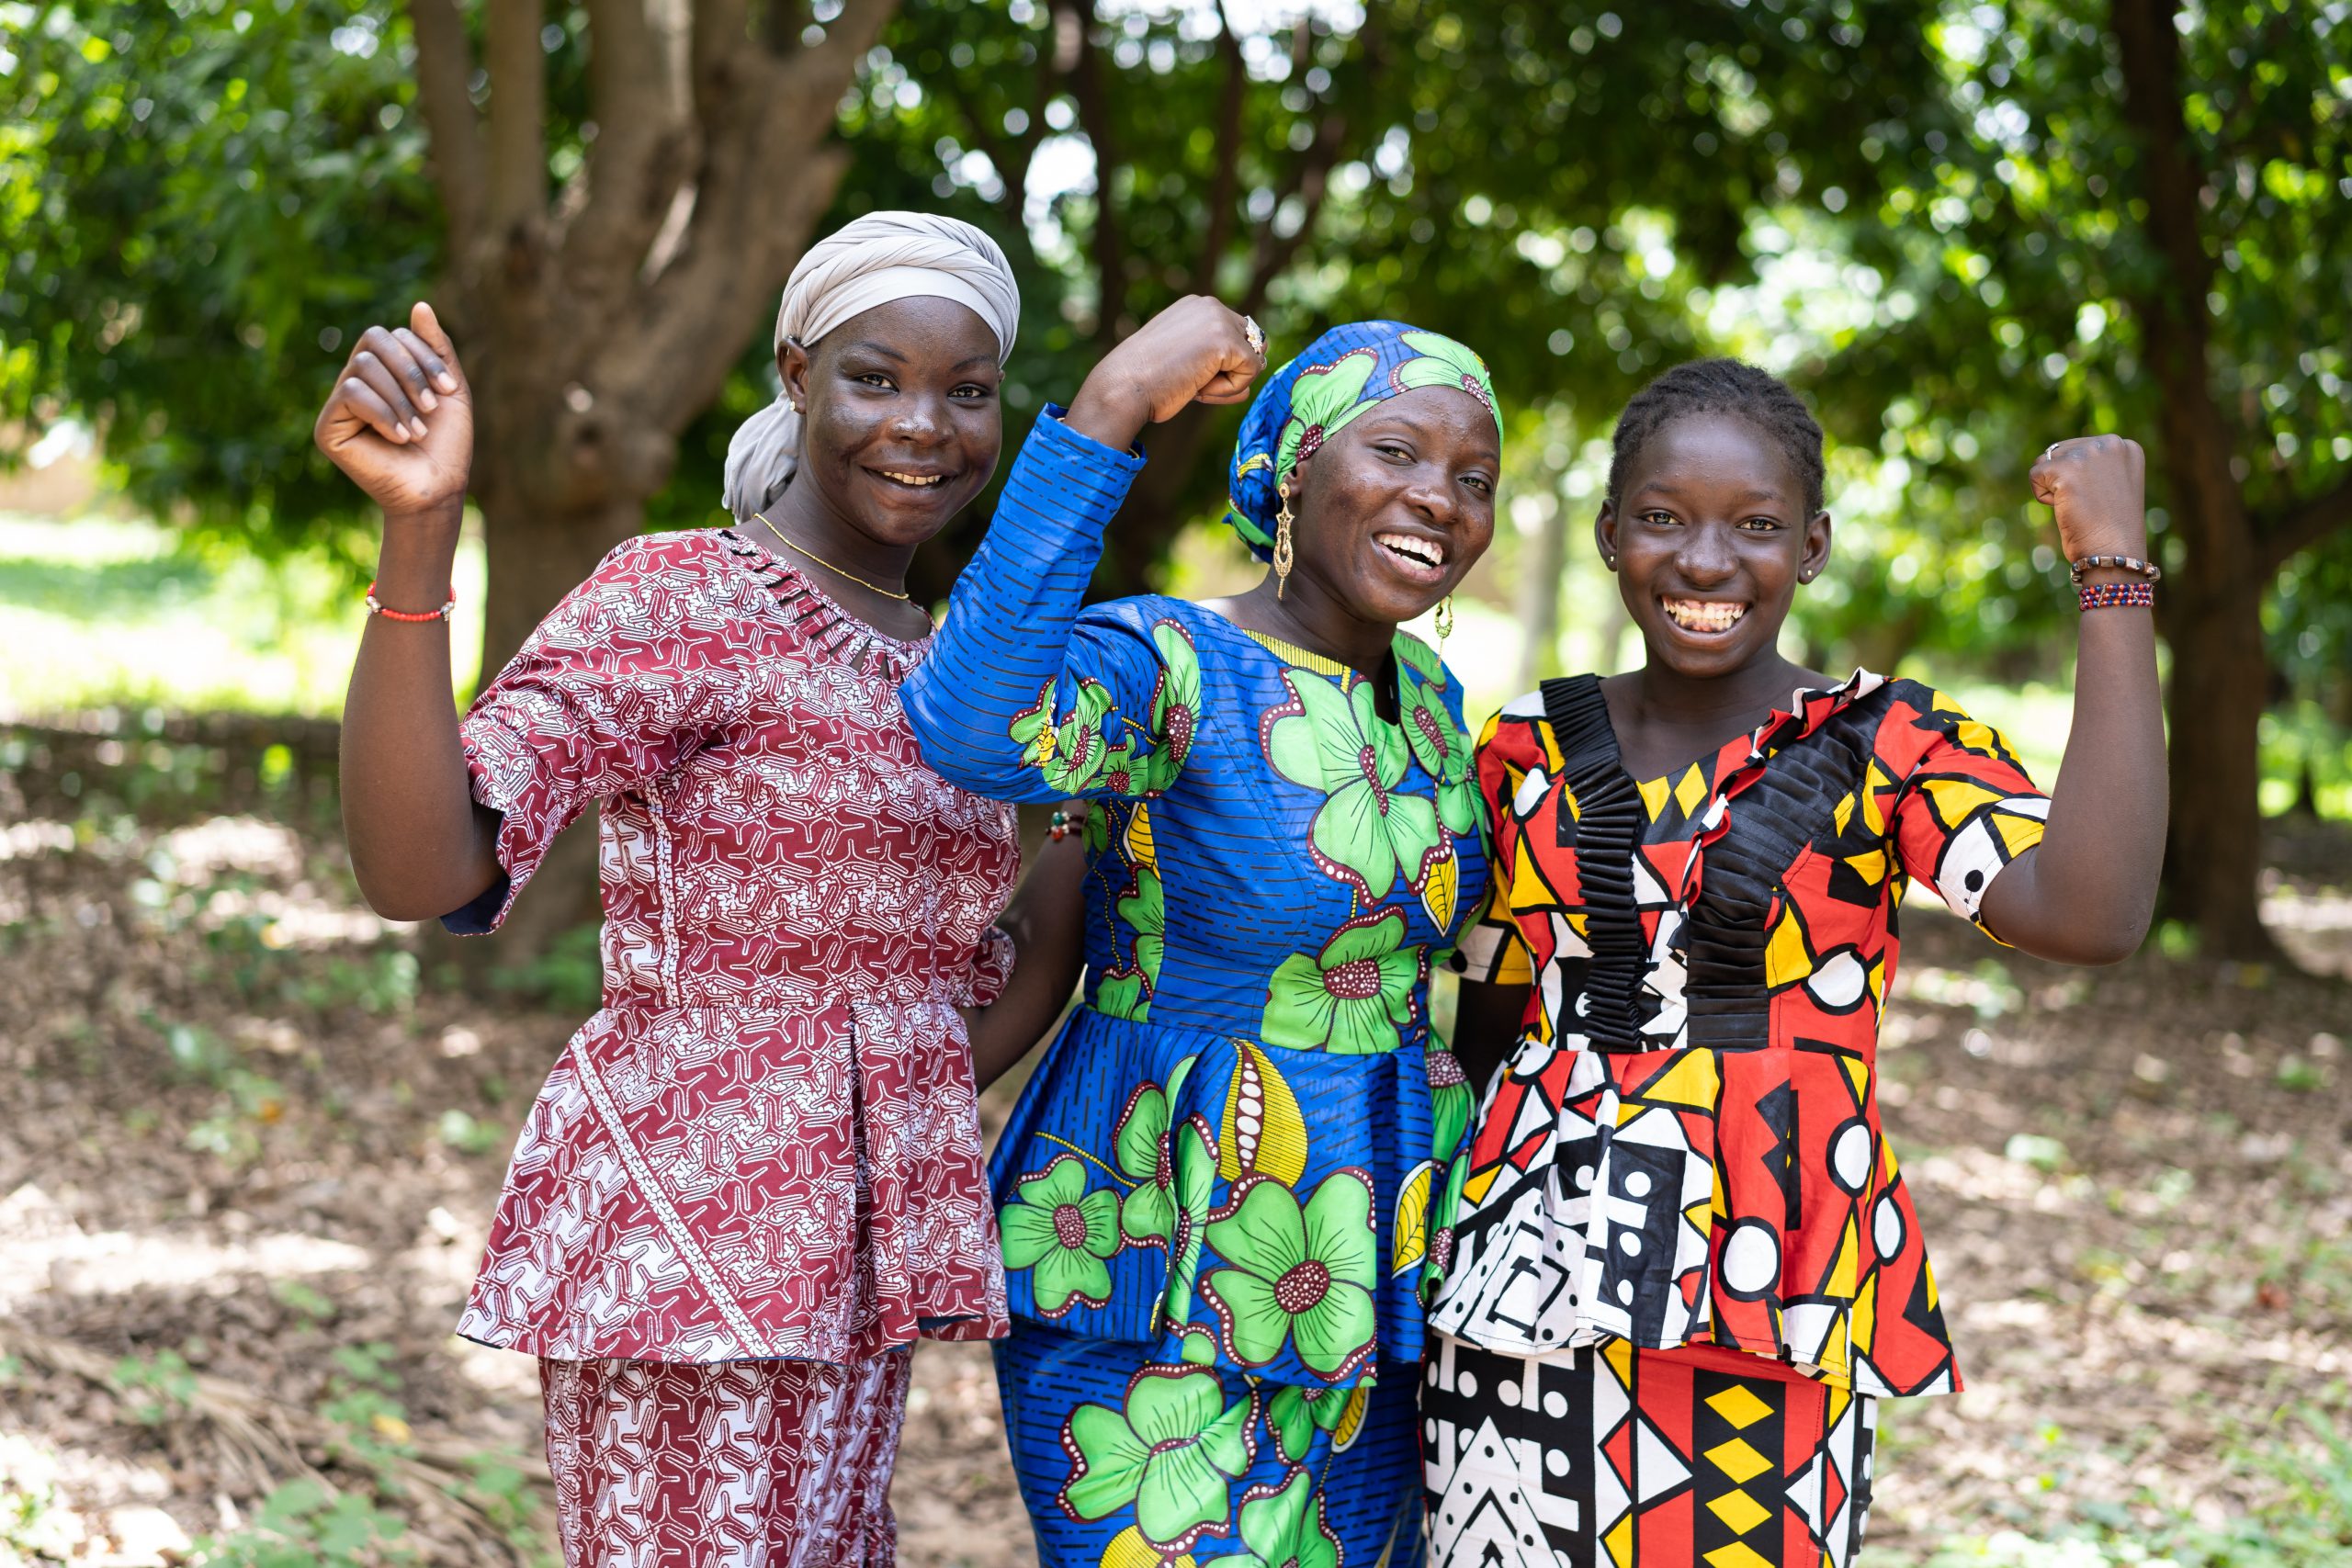 Three young black African villagers in colourful traditional dresses smiling at the camera with their clenched fists.